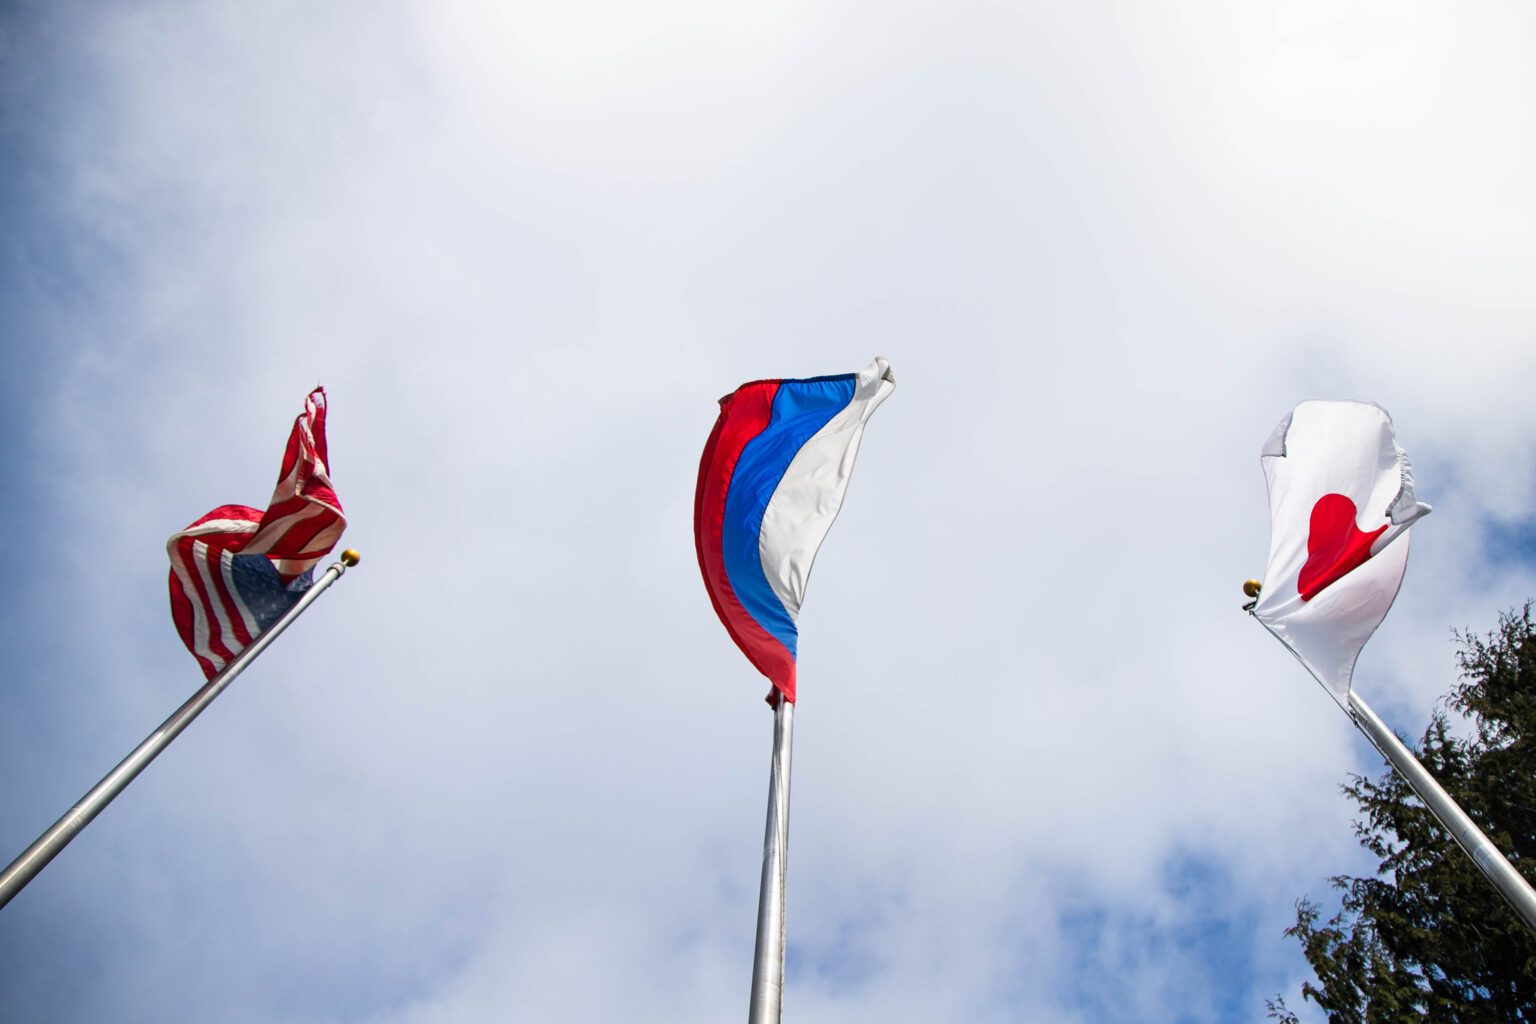 A Russian flag flies behind the Anacortes welcome sign on March 4